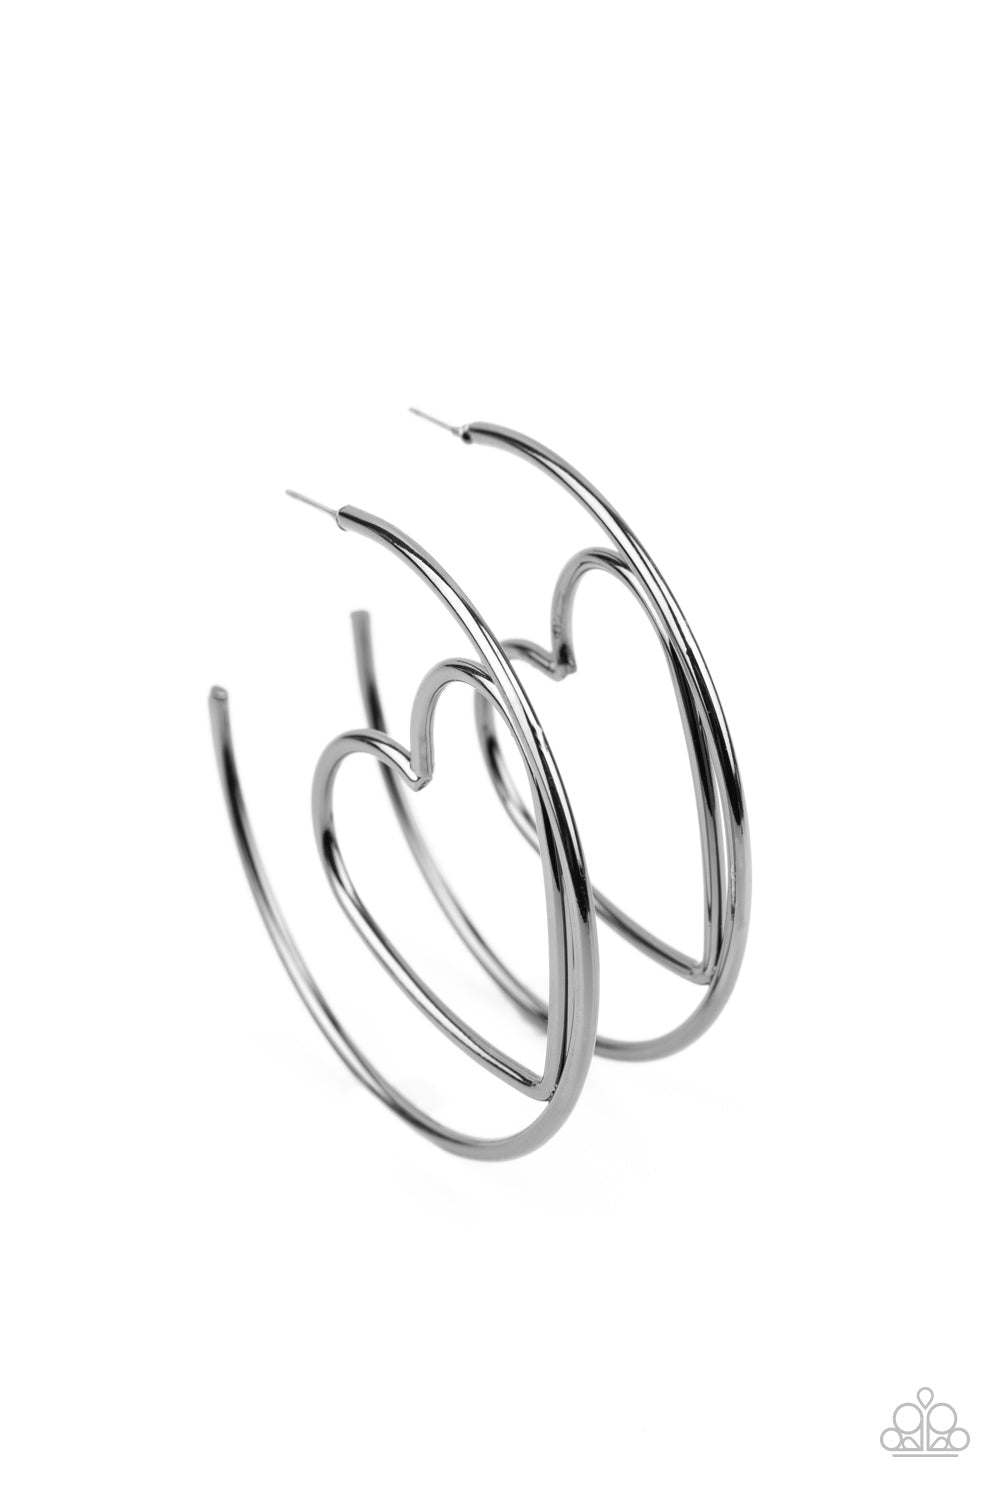 Love At First BRIGHT - Black - Gunmetal Hoop Earrings - Paparazzi Accessories - Glistening gunmetal wire delicately bends into an airy heart frame inside a classic gunmetal hoop, creating a flirtatious display. Earring attaches to a standard post fitting. Hoop measures approximately 2" in diameter.